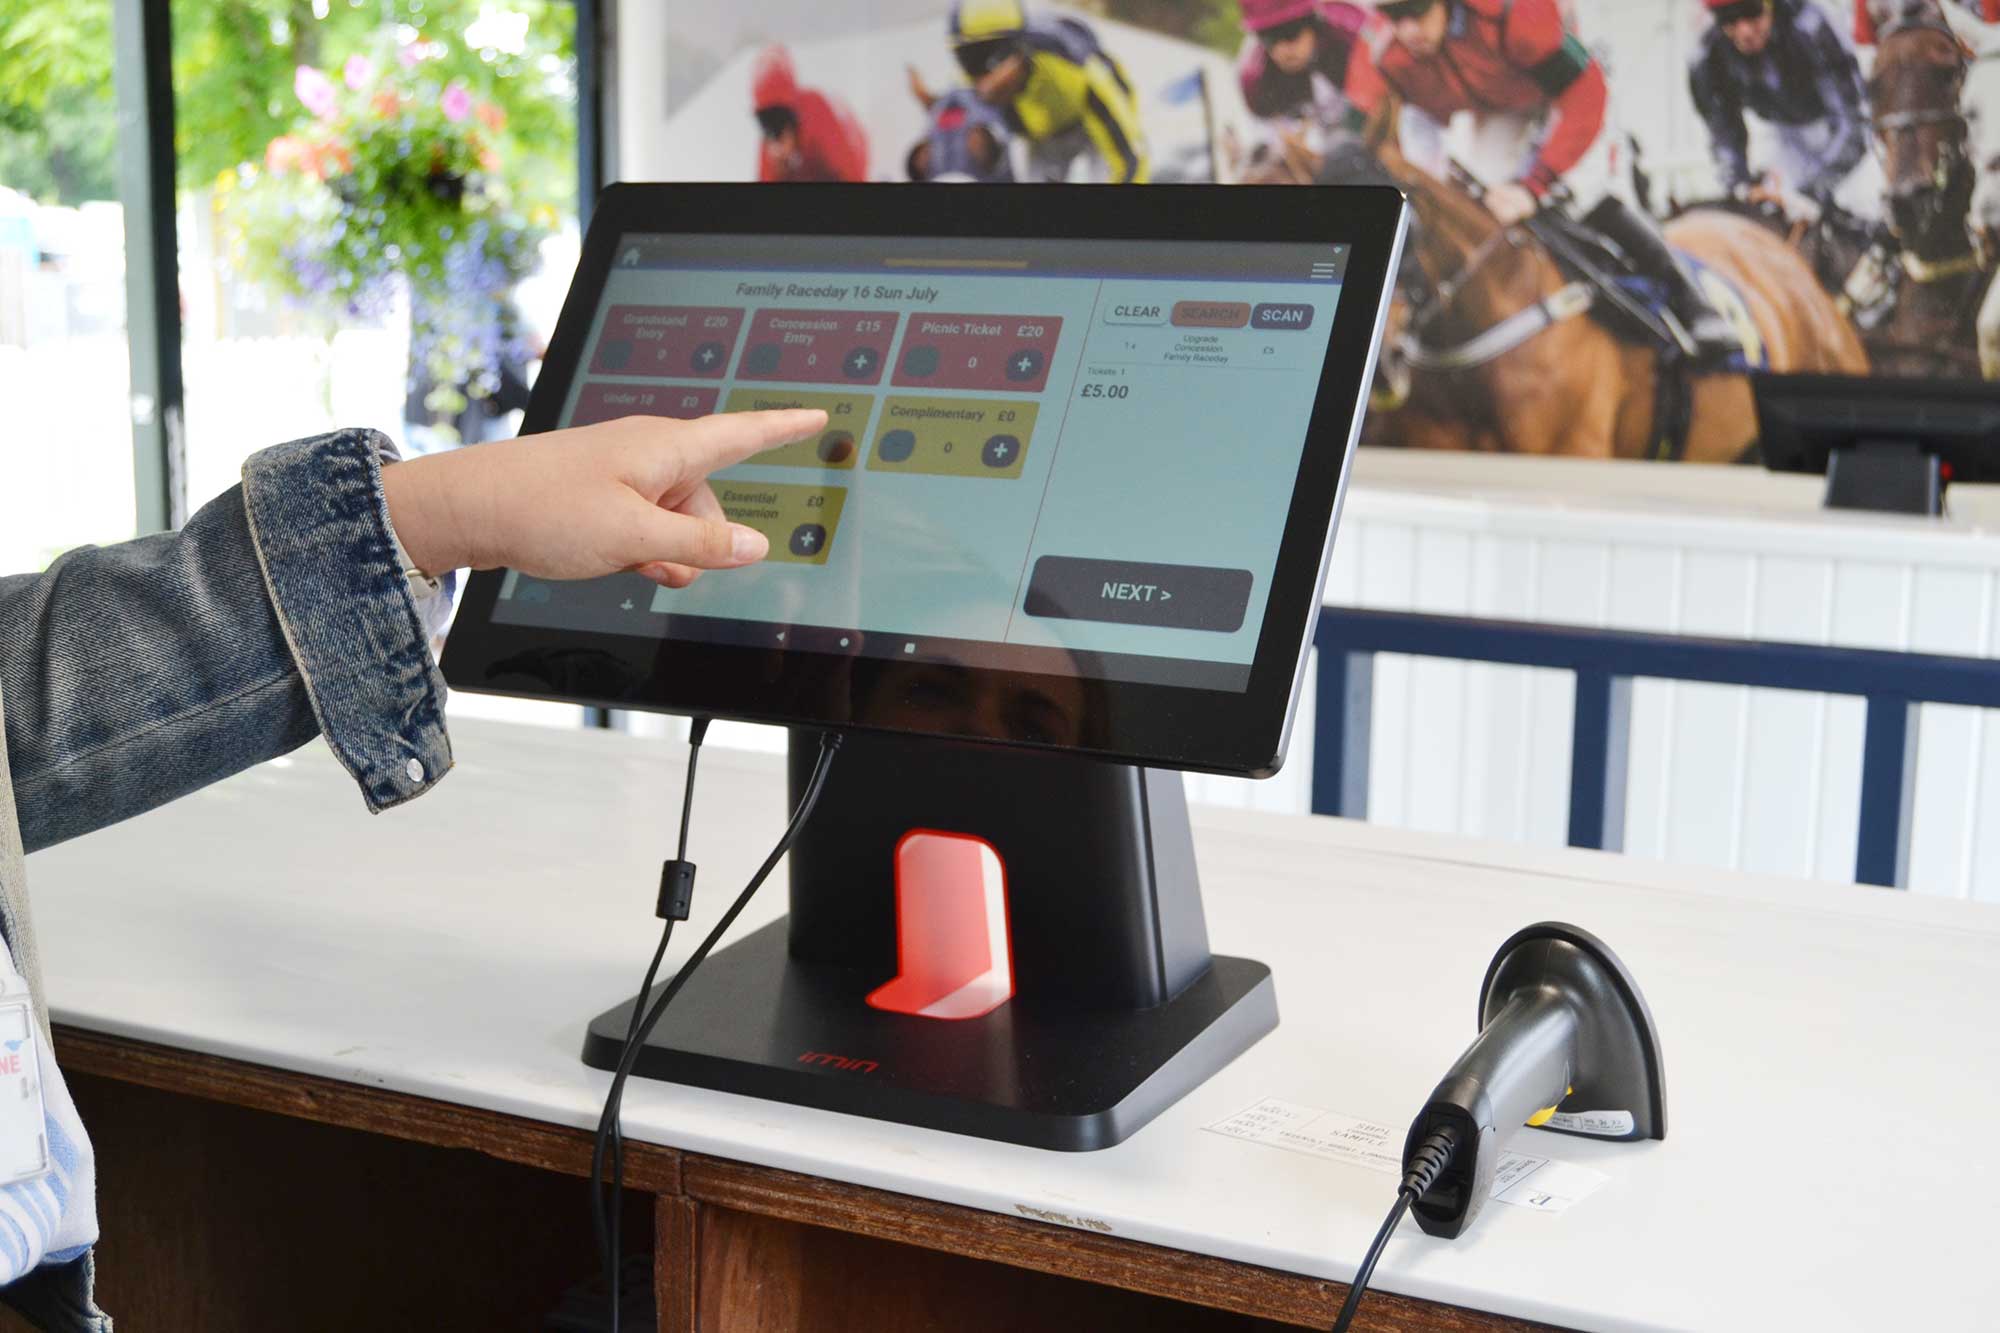 scanning tickets at Perth Racecourse with LibertyEngine and iMin terminal